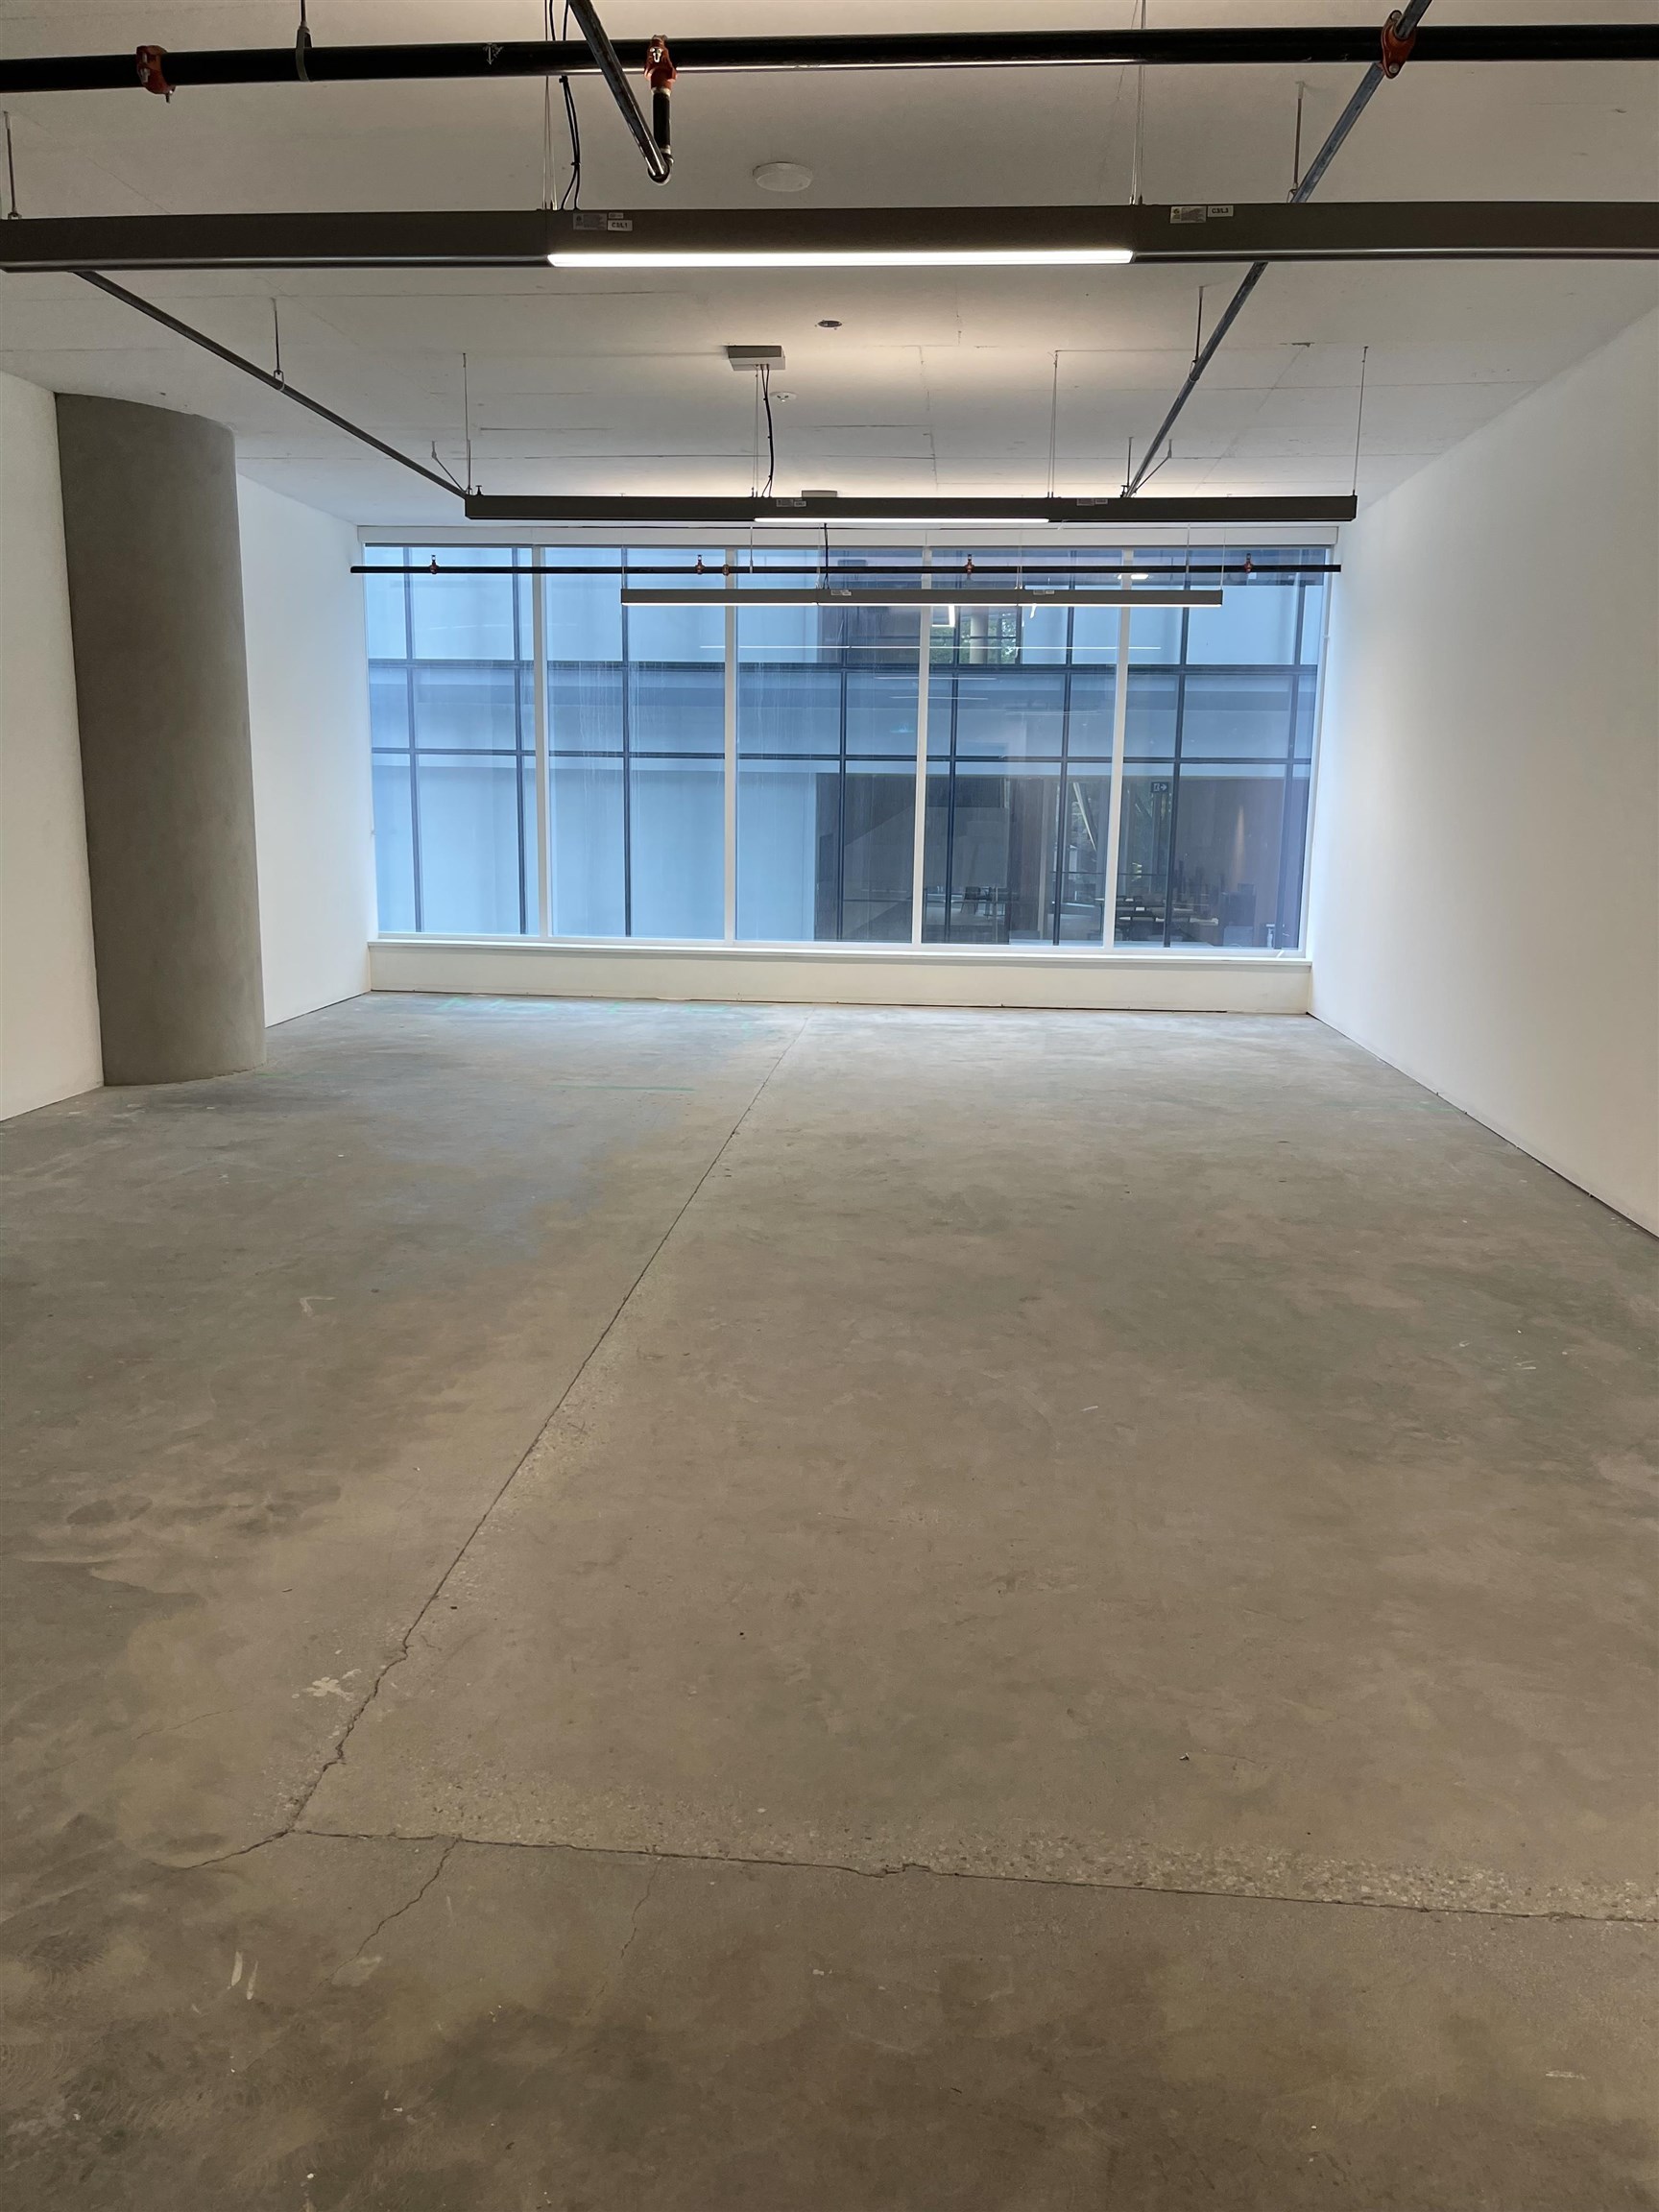 502-1281 HORNBY STREET, Vancouver, British Columbia, ,Office,For Lease,C8054219